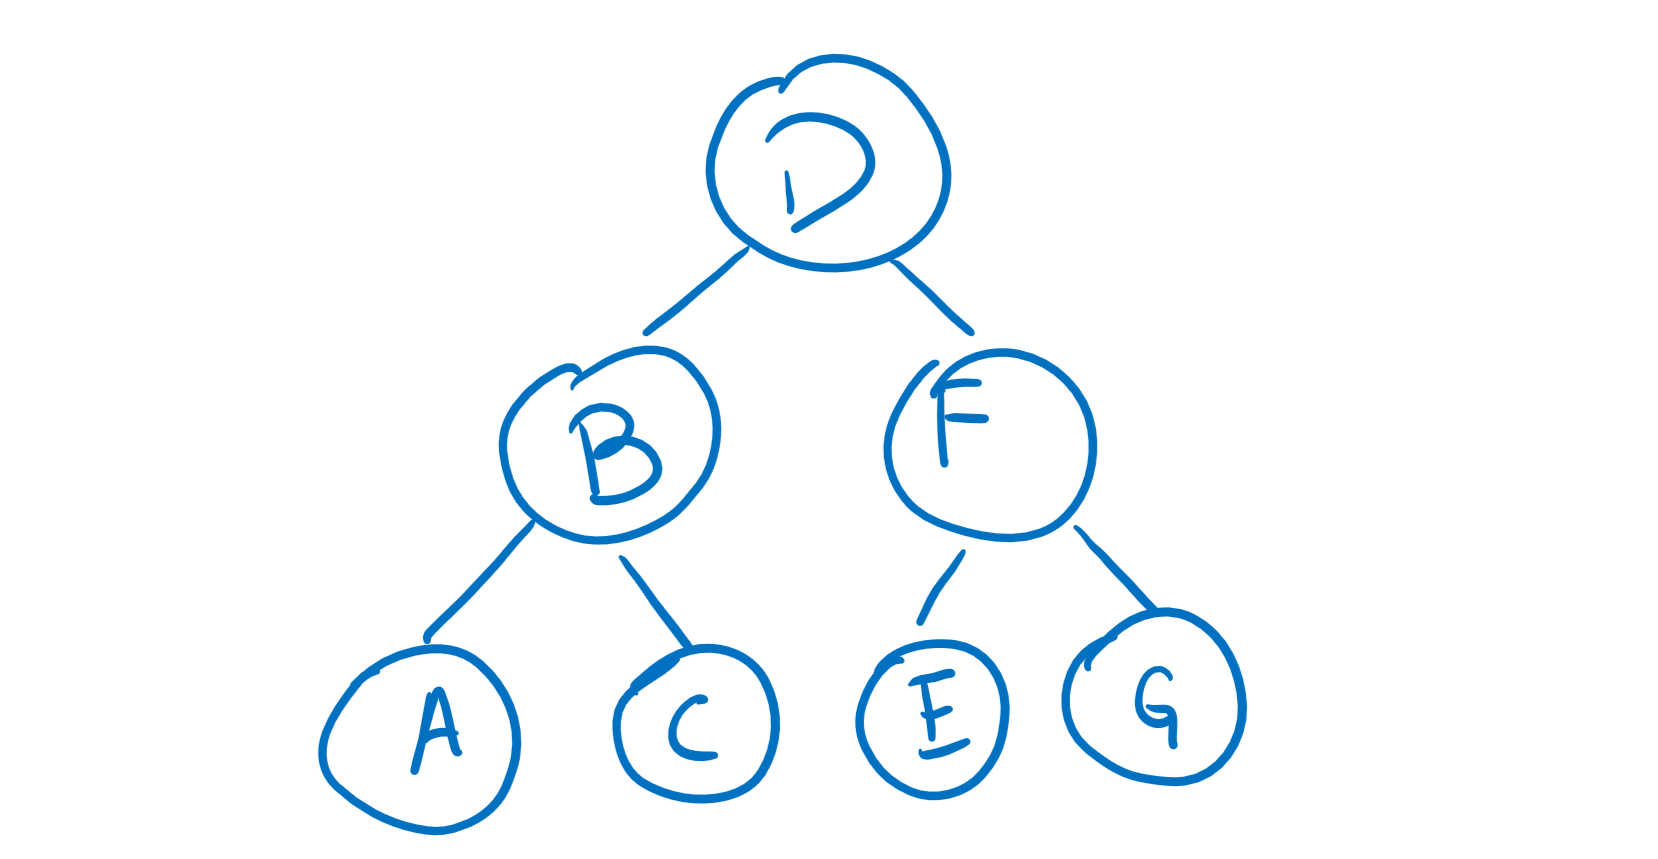 The example tree we will use for traversal illustrations.